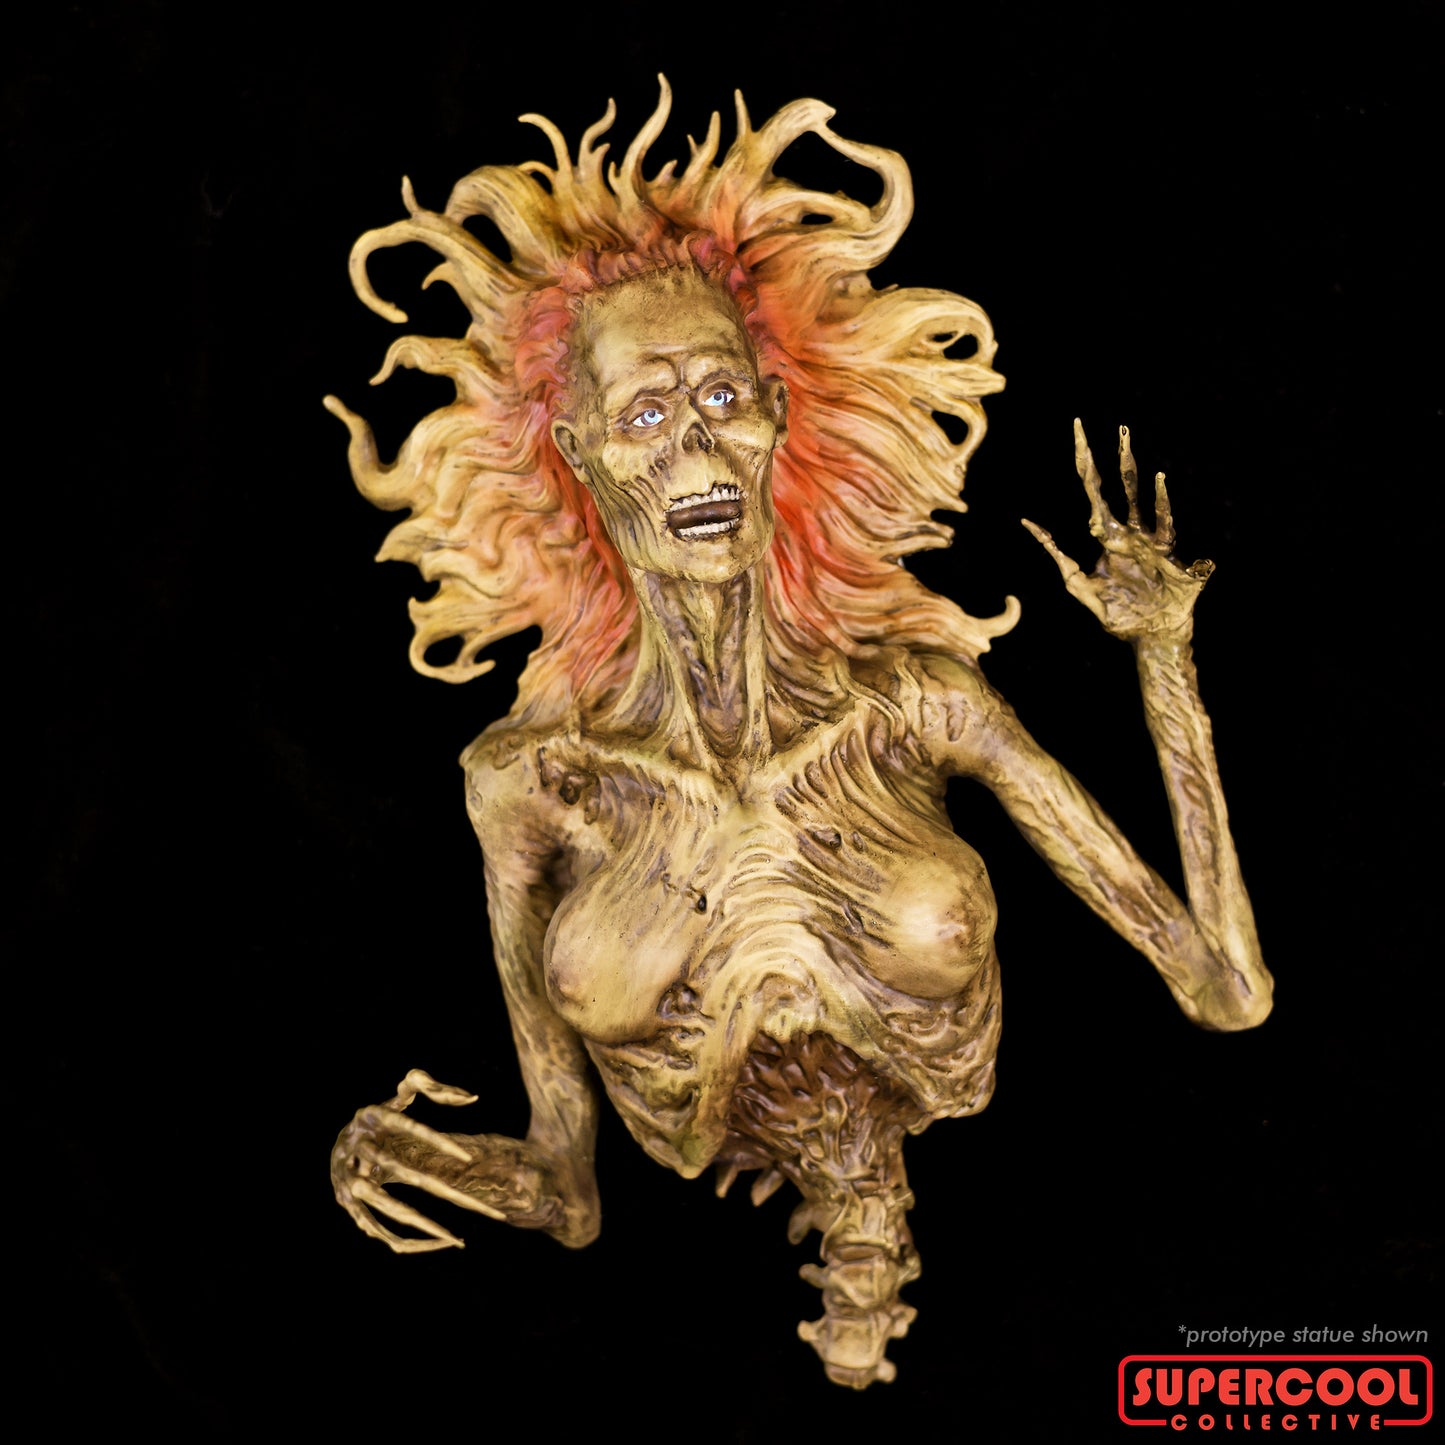 The Return of the Living Dead: Half-Corpse 7inch Statue